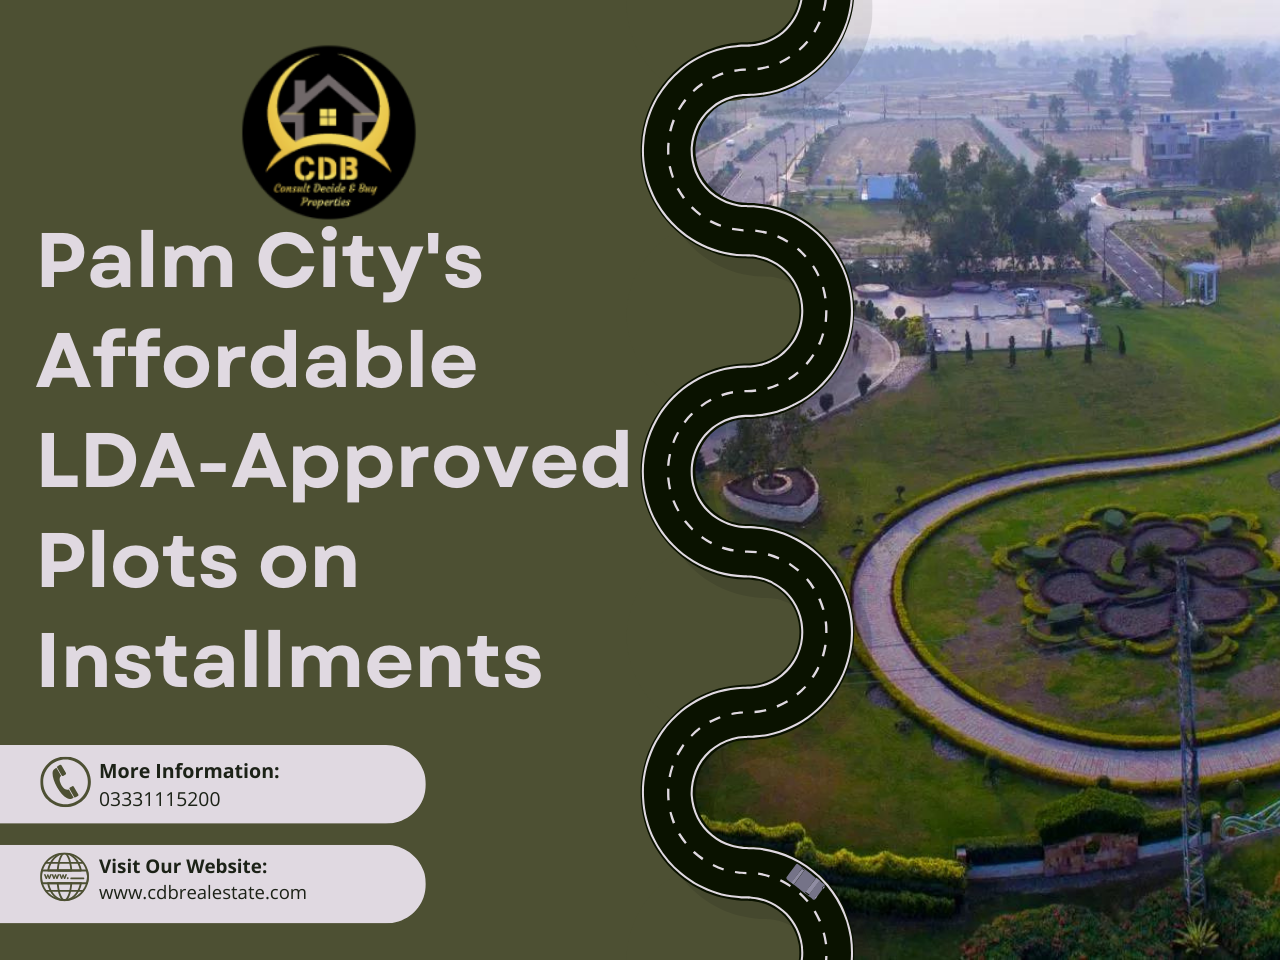 Palm City's Affordable LDA-Approved Plots on Installments